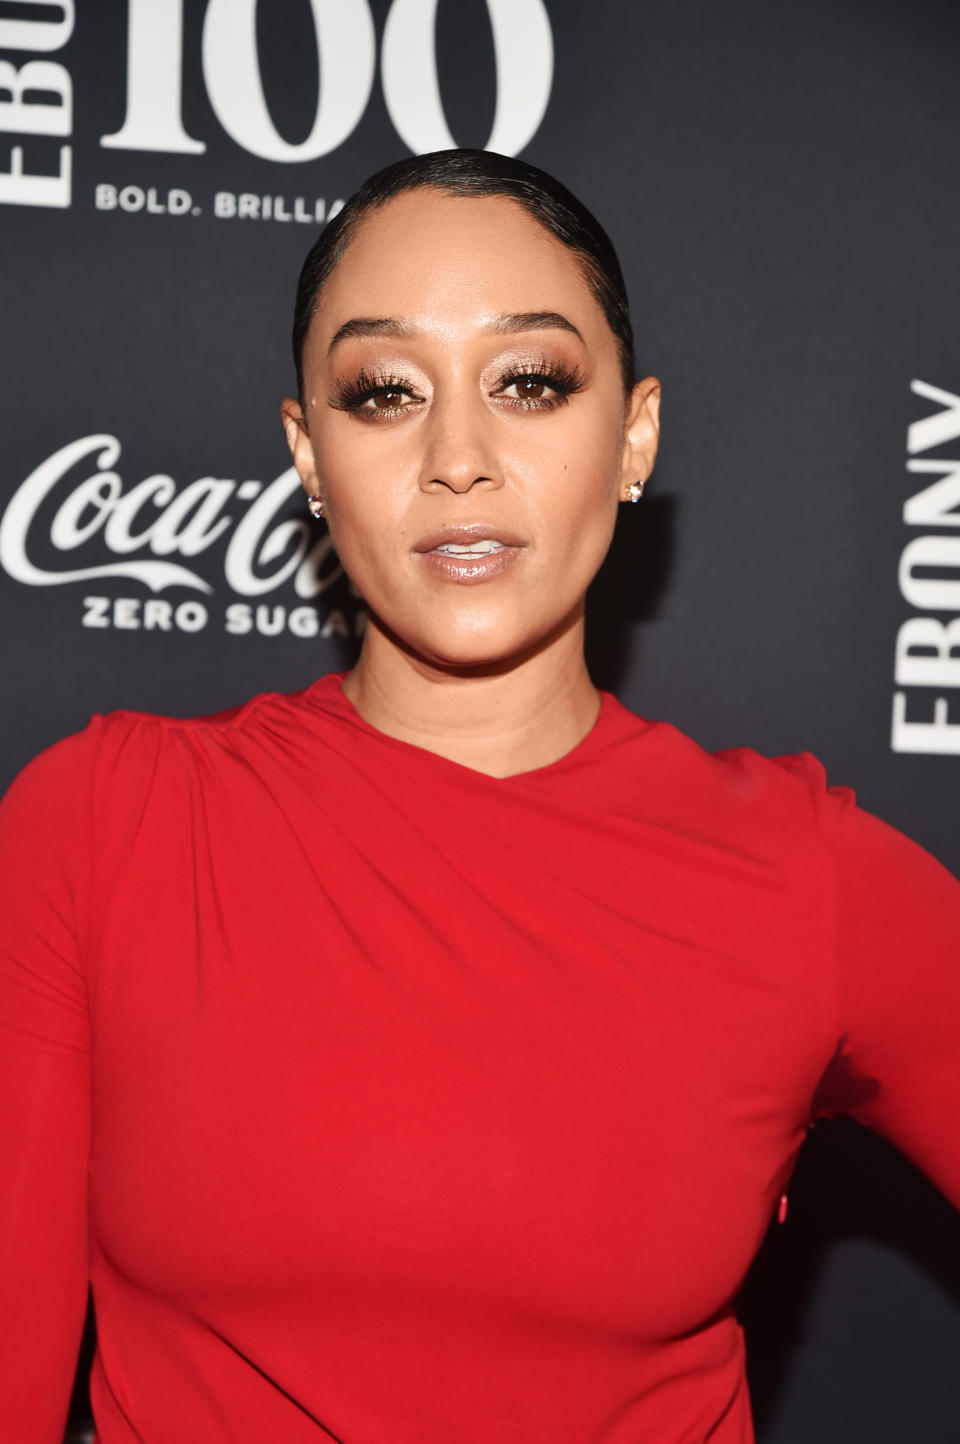 Tia Mowry shares selfies to talk about her struggles with anxiety (Photo by Alberto E. Rodriguez/Getty Images)